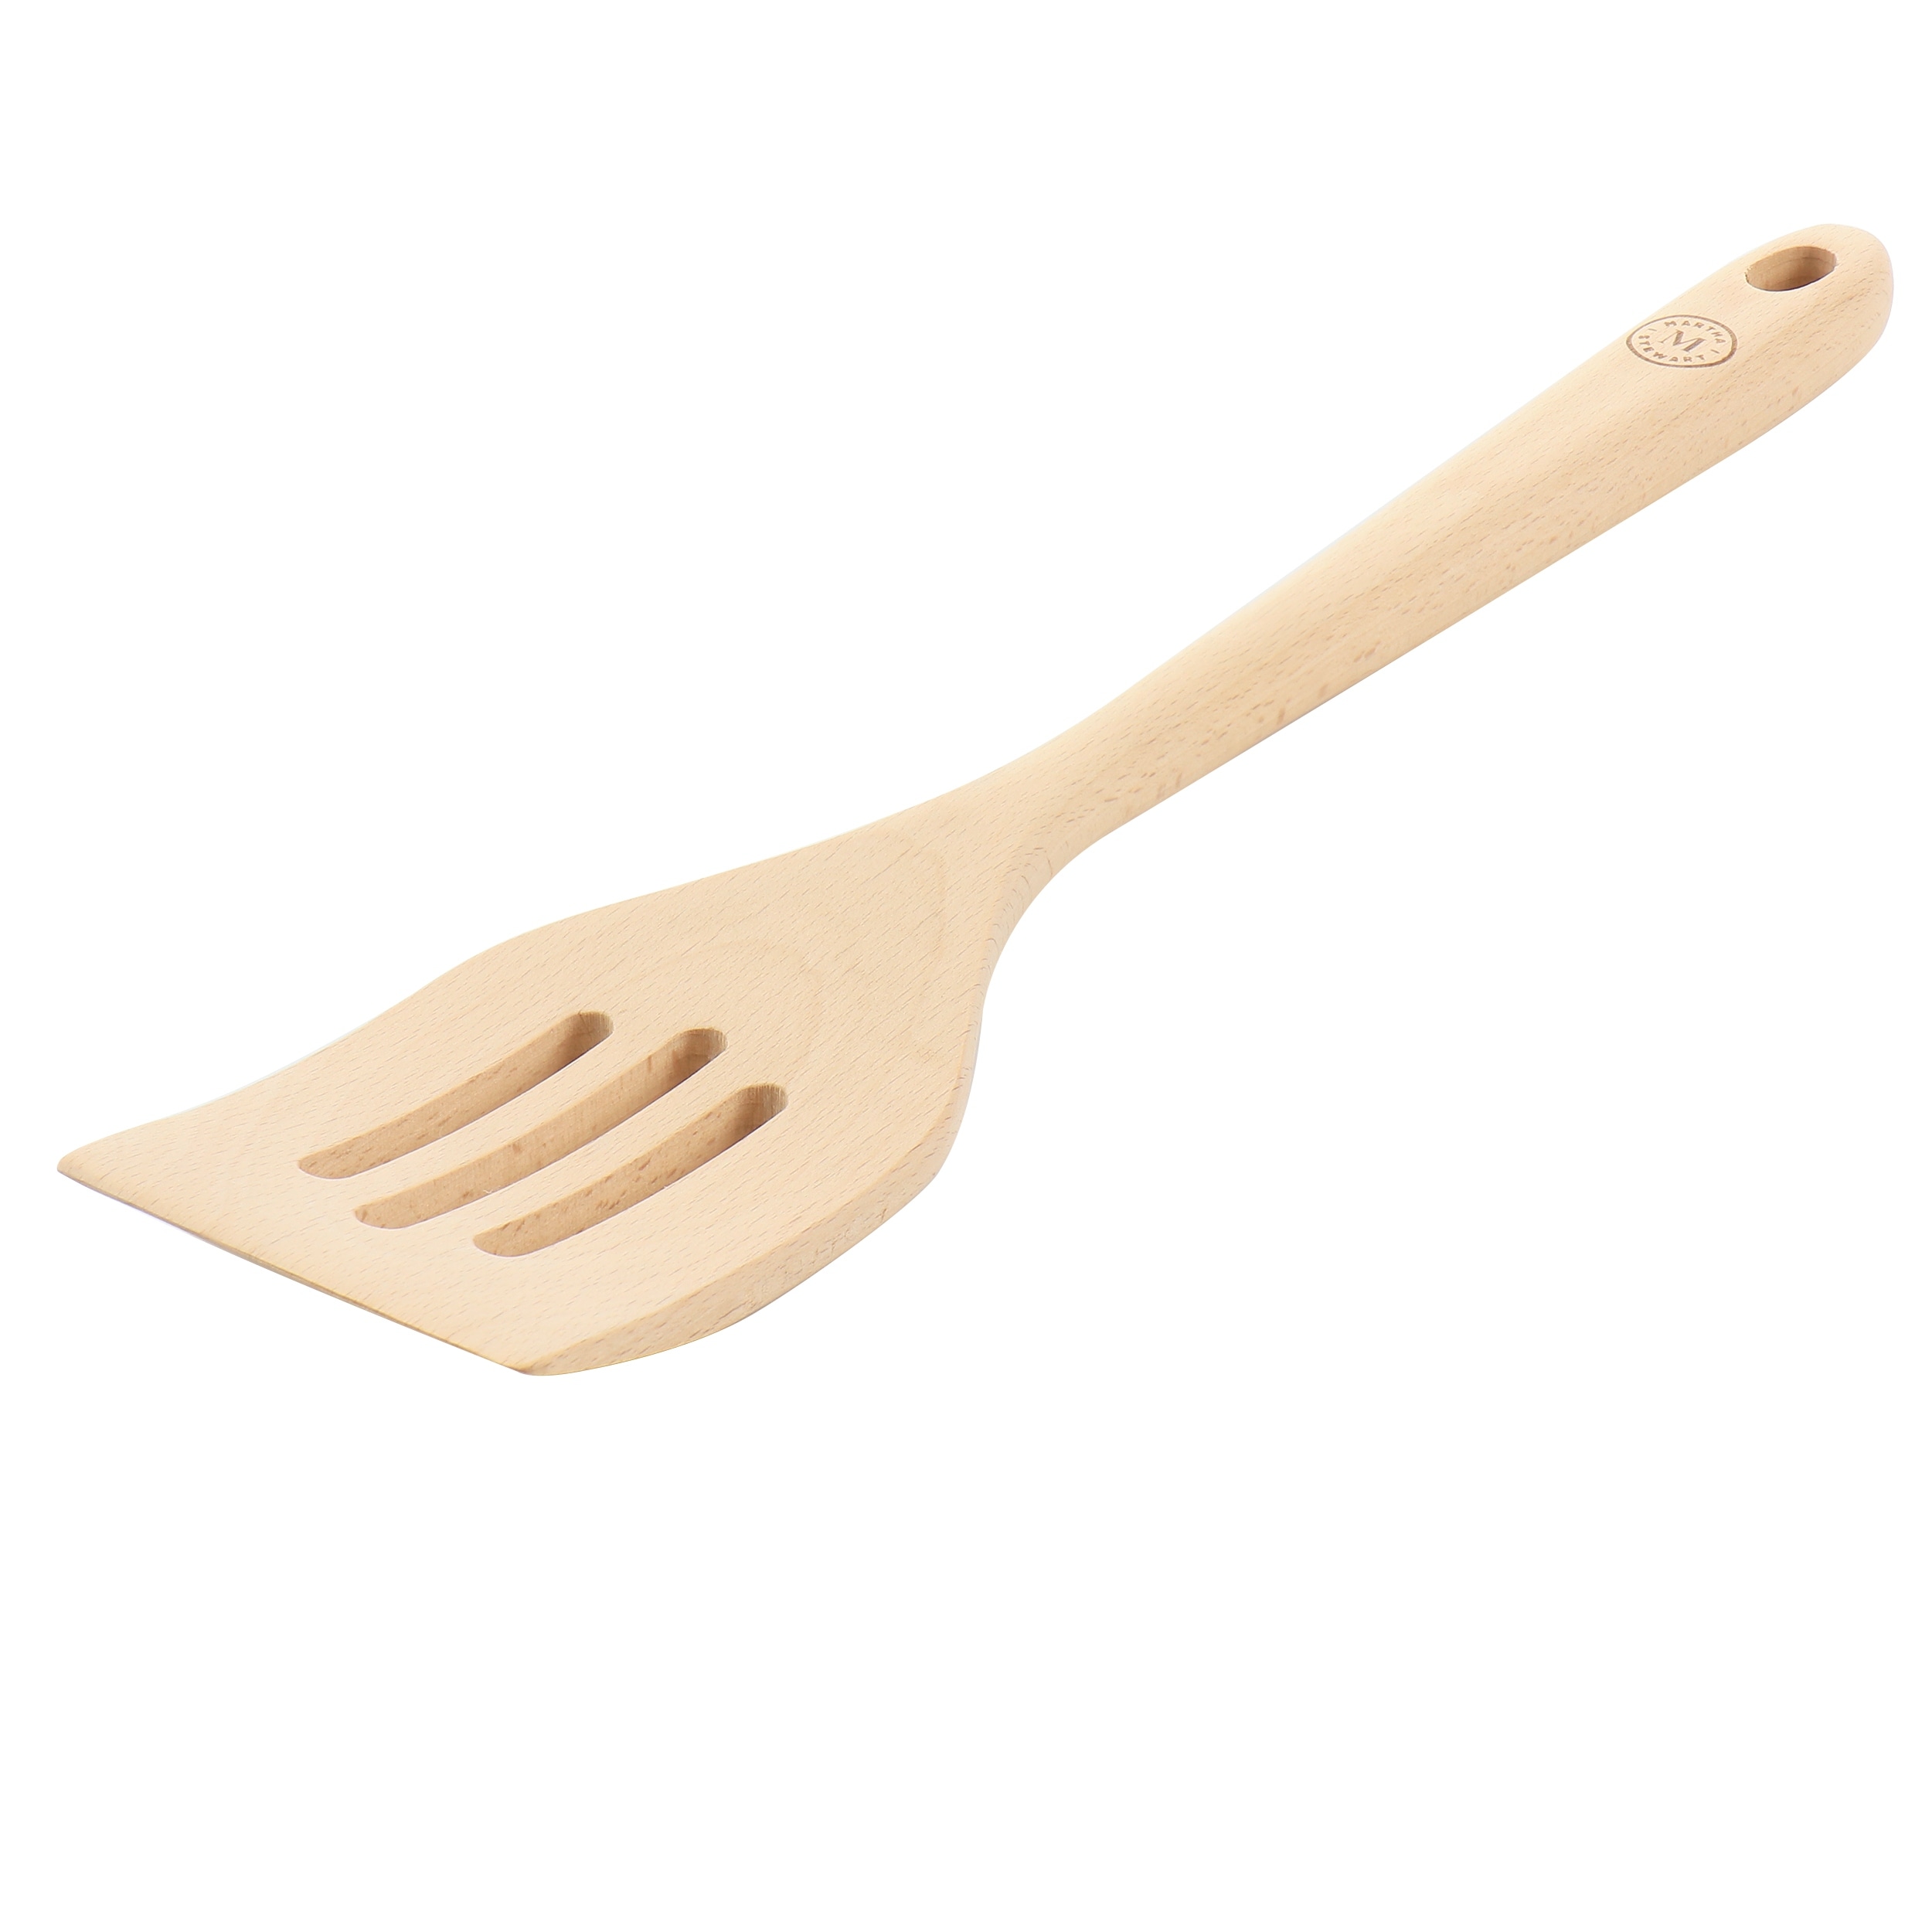 https://ak1.ostkcdn.com/images/products/is/images/direct/260df999fa6deb438ca6b3aab60f550f1af9f0fd/14-Inch-Beech-Wood-Slotted-Turner.jpg